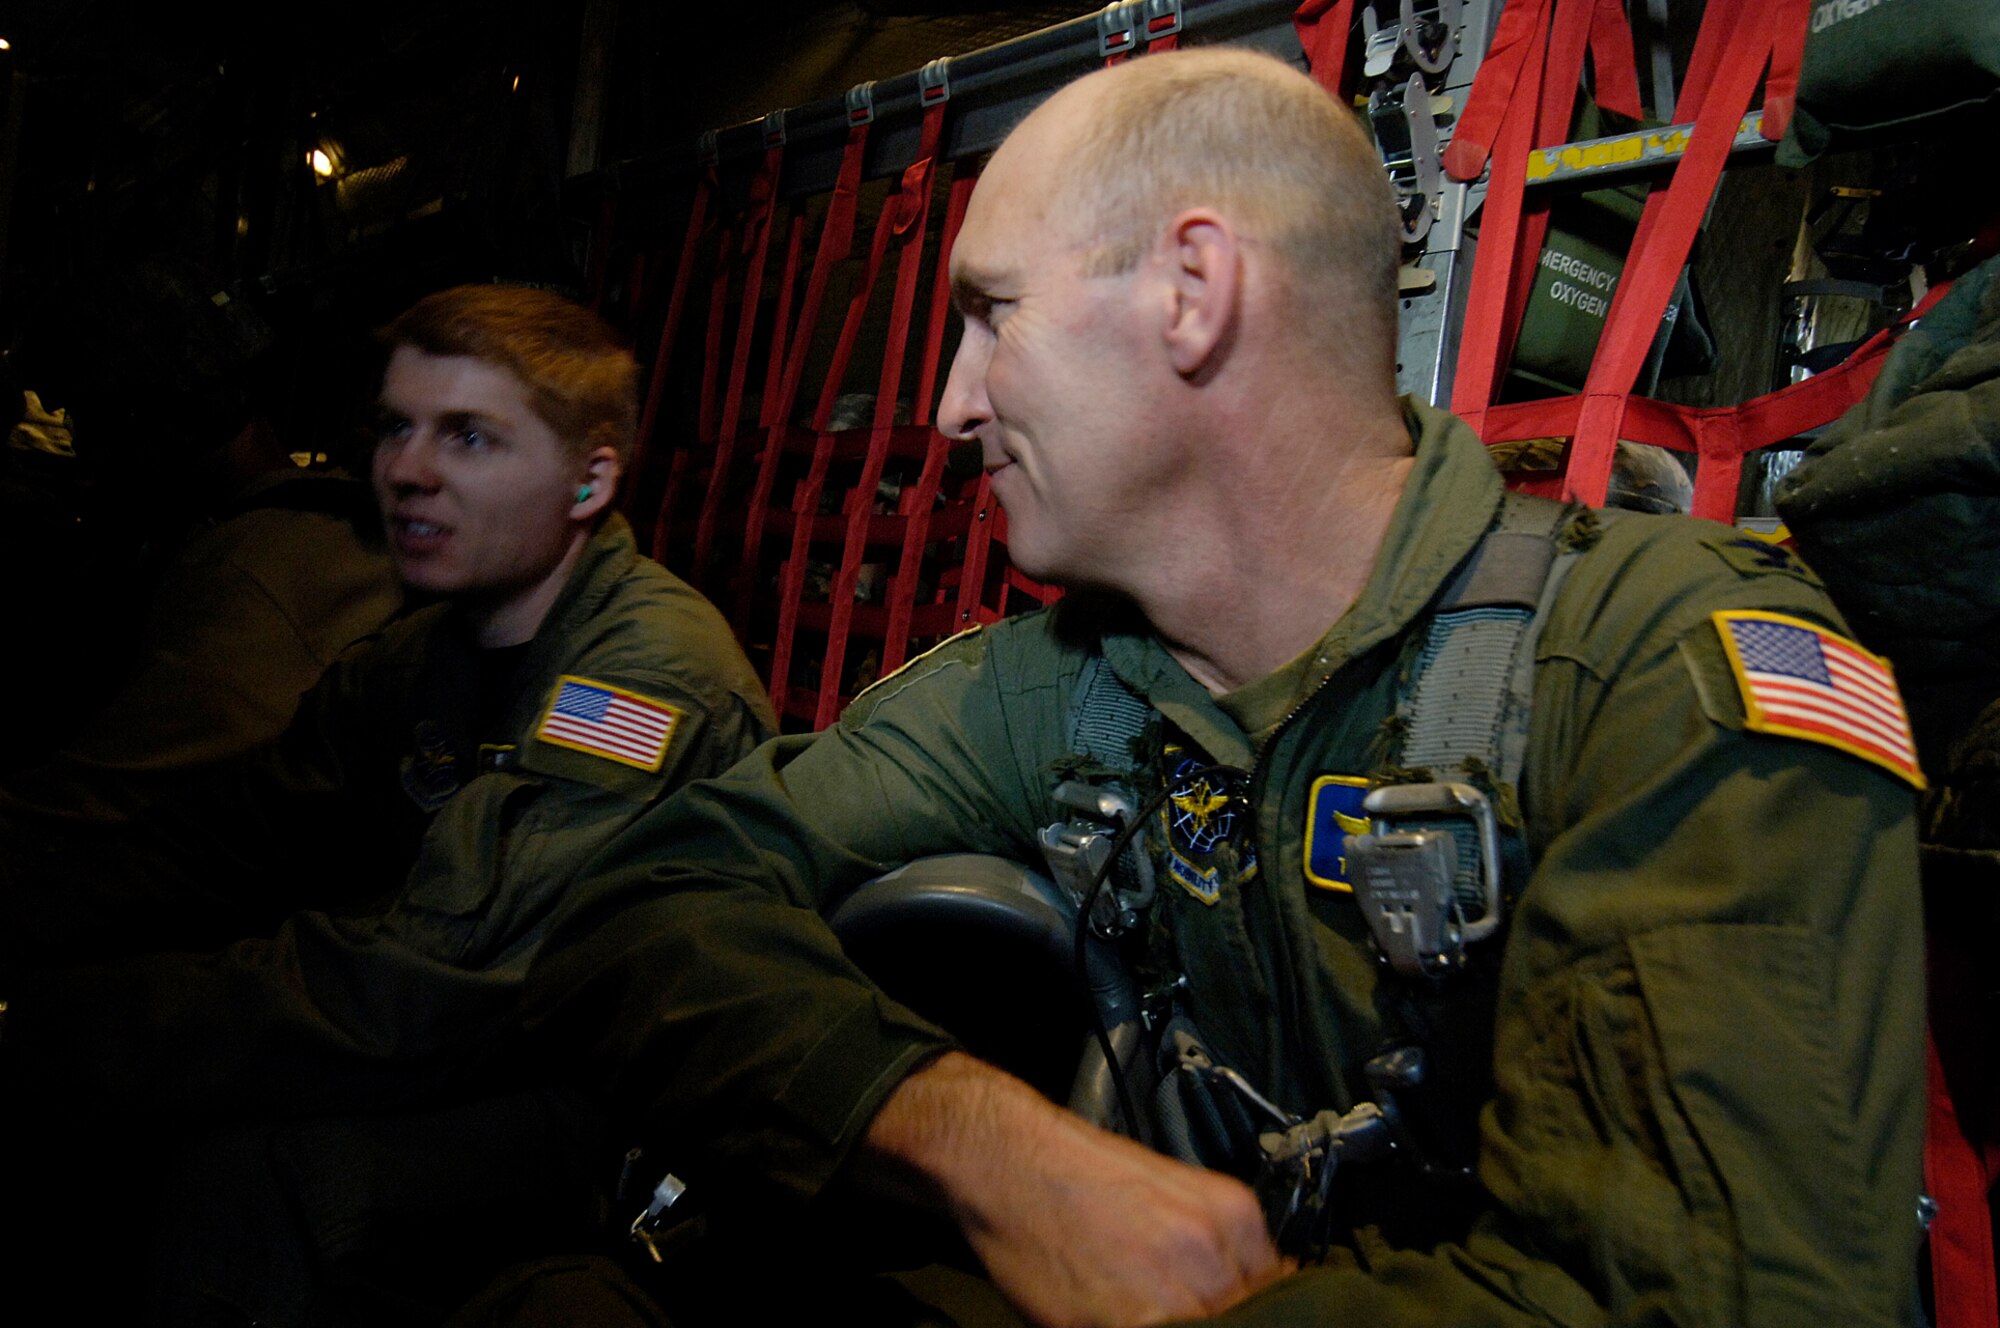 Col. Timothy Zadalis, 43rd Airlift Wing Commander, talks to an Airman while riding on one of Pope’s C-130’s during Operation Toy Drop Saturday. The event helped support the military and local community, collecting more than 1,400 toys for deserving families in the Fayetteville, N.C. area. (U.S. Air Force photo by Senior Airman Clay Lancaster)